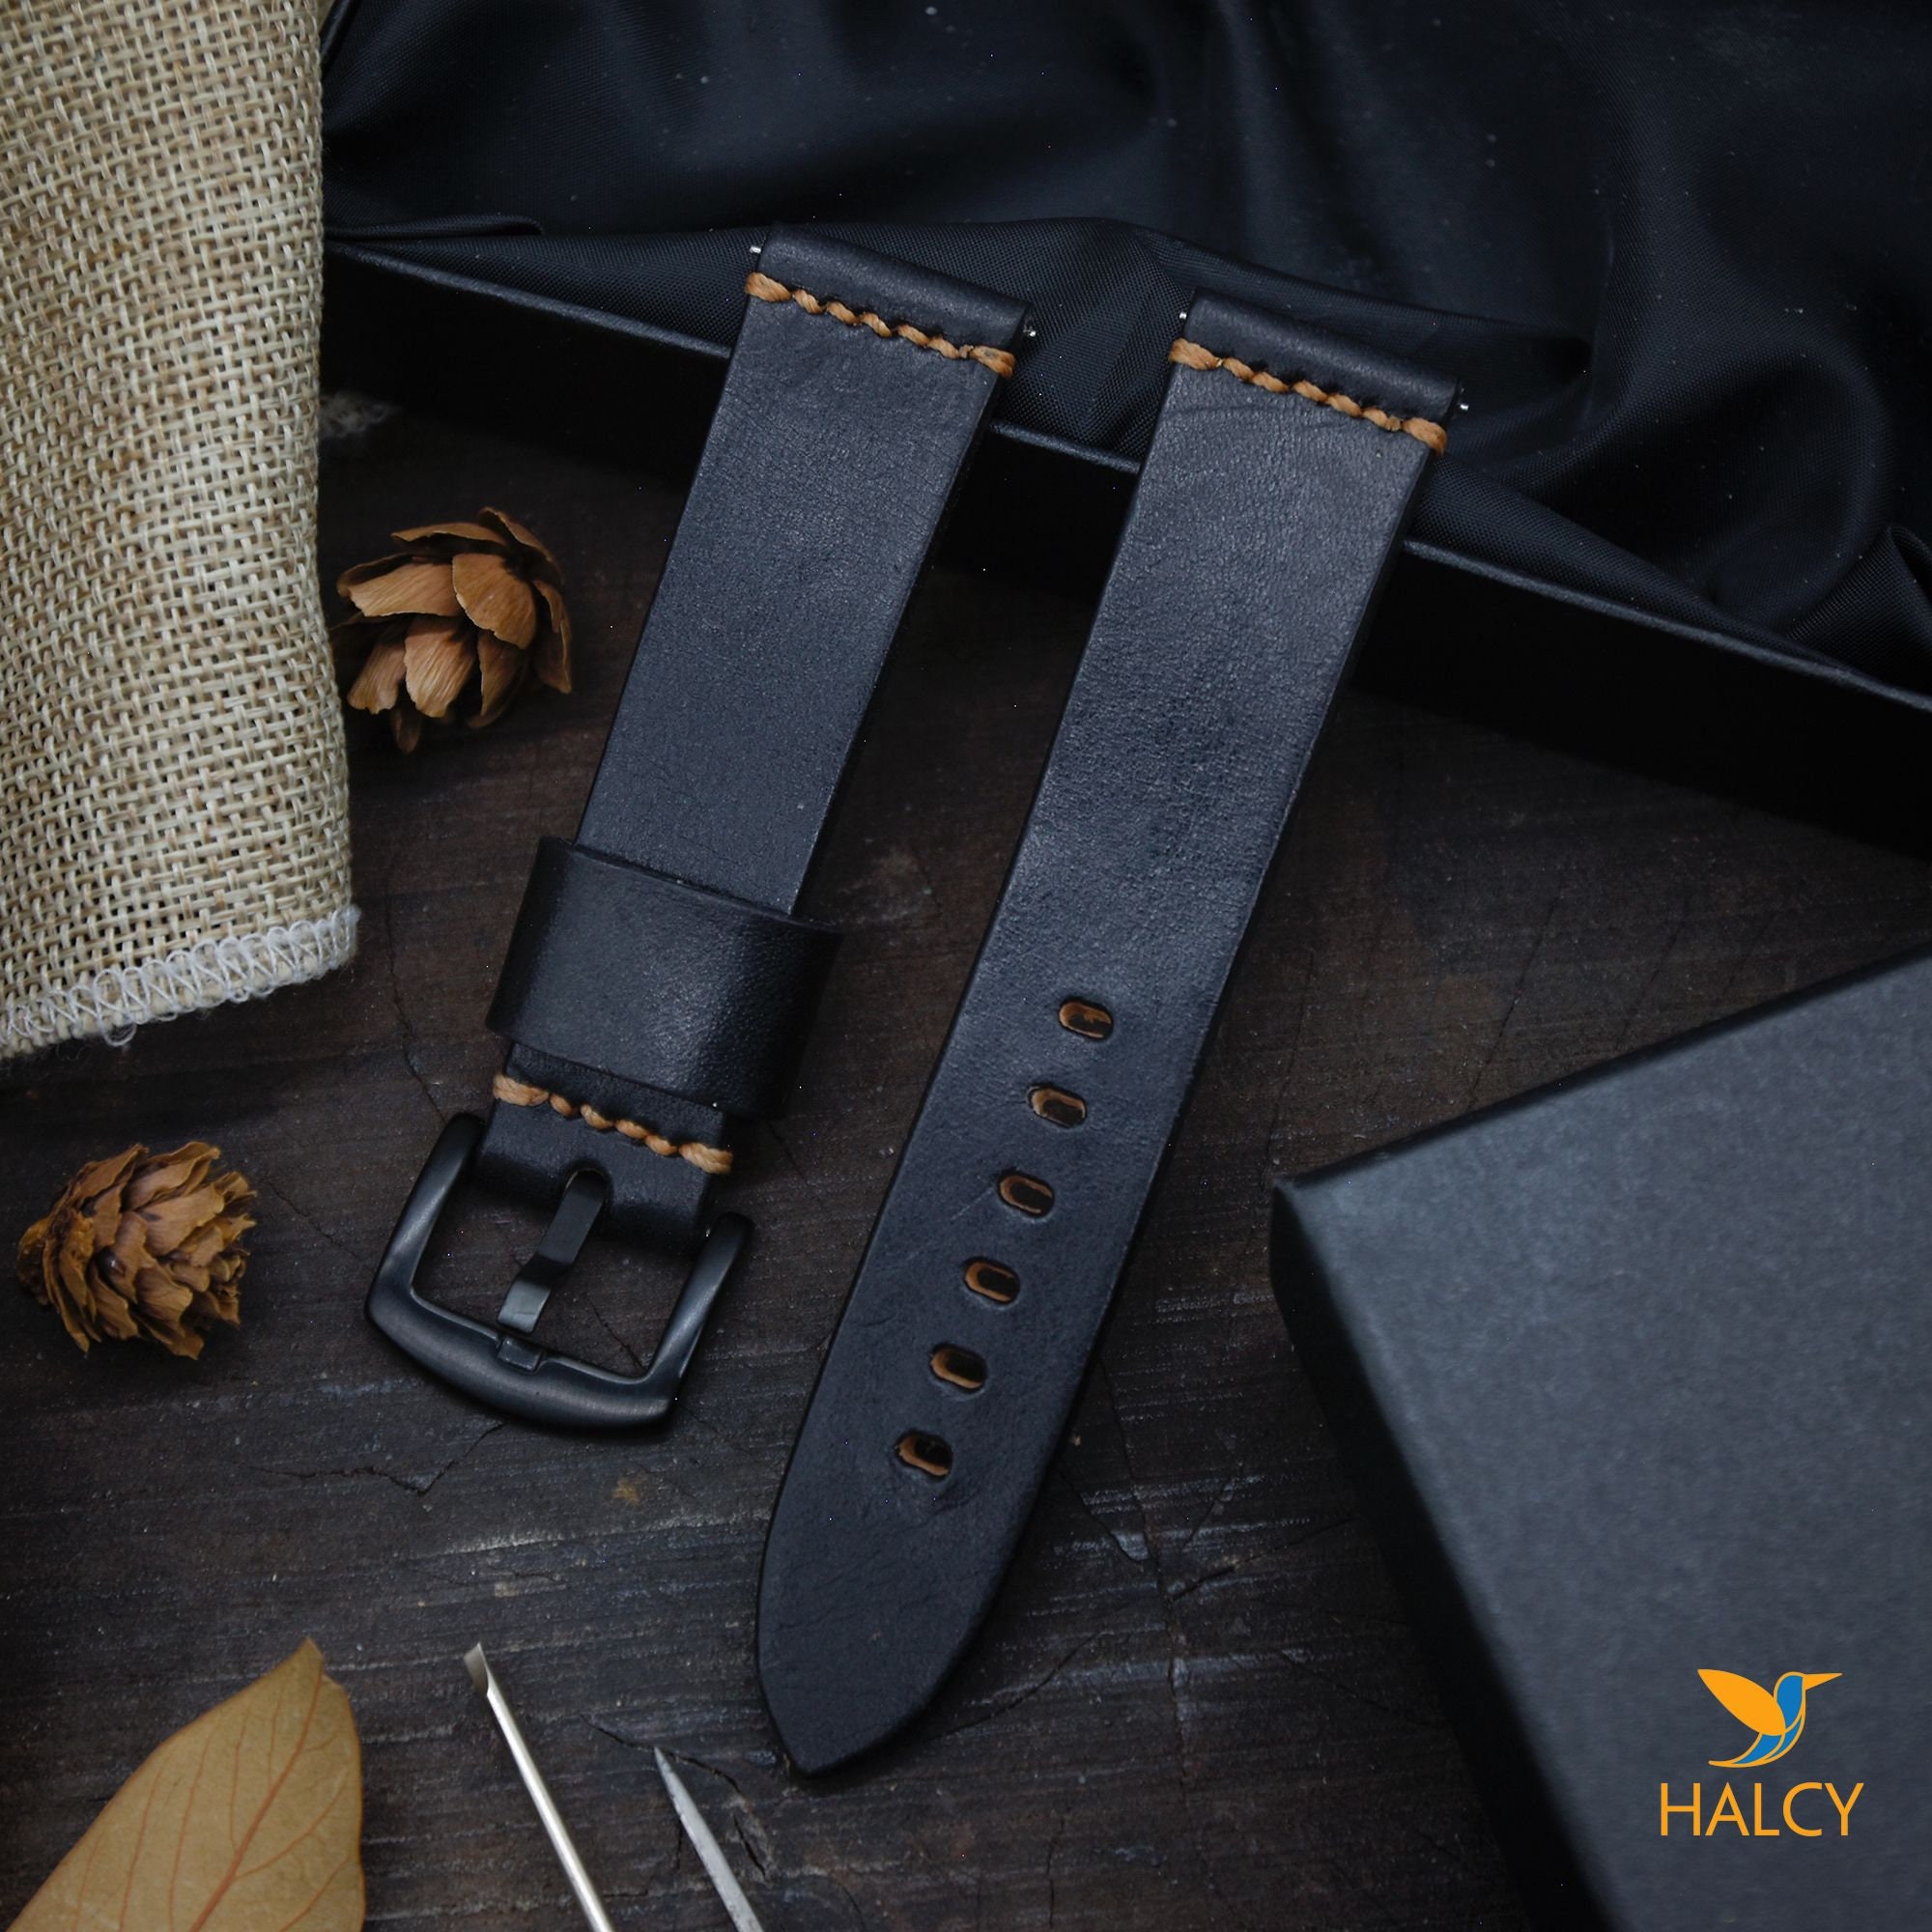 Leather Vegetable Tanned Choice With Strap, Watch Color - Cowhide Bars, Etsy Spring Buckle of Black Quick-release Leather Italian Choice Width,